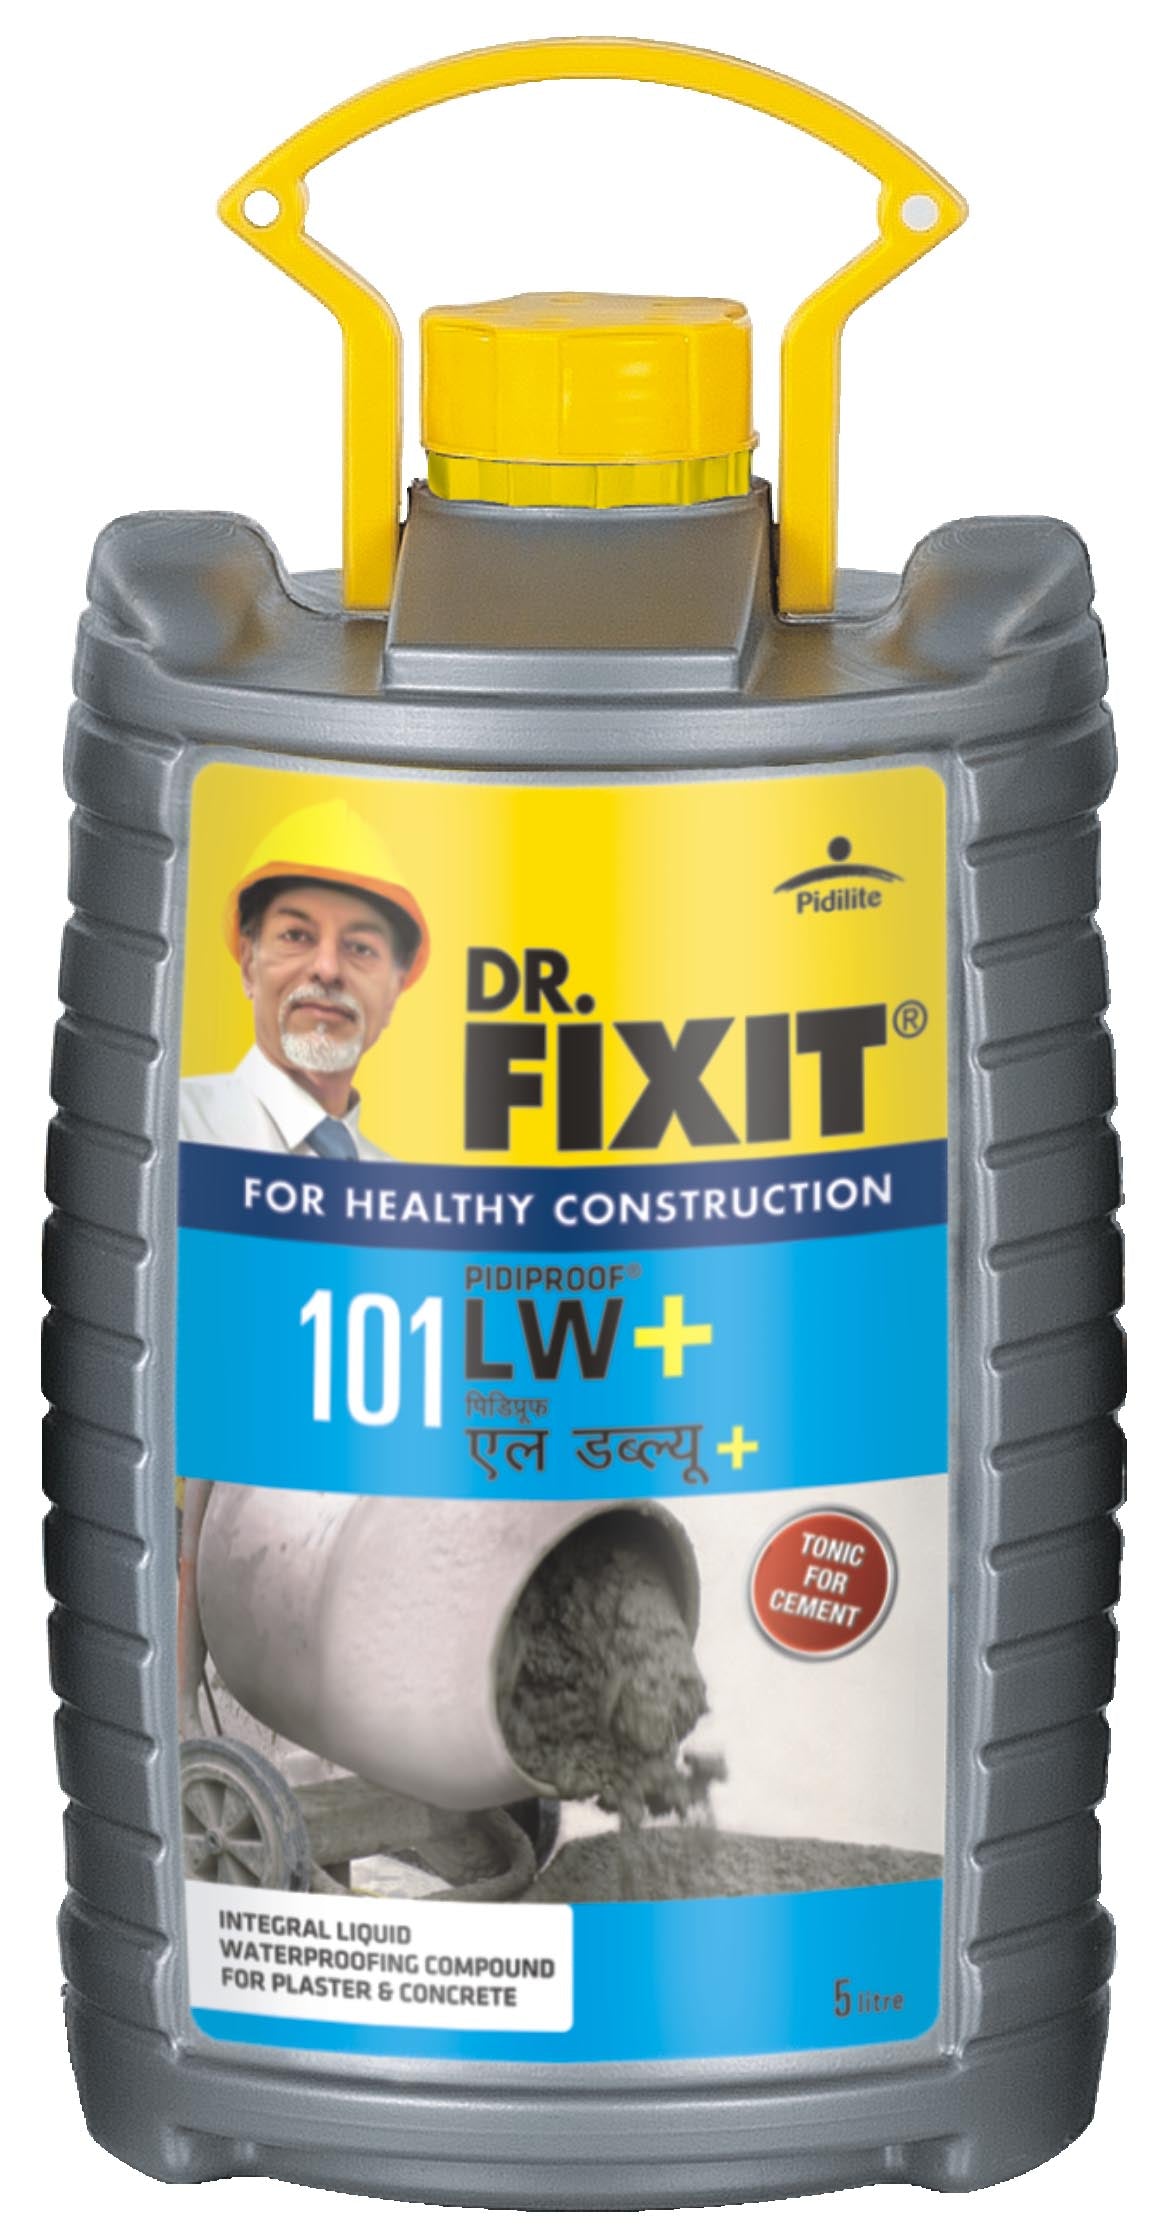 How To Use Dr Fixit Waterproofing Liquid Areas Of Applications Hindustan Steel Suppliers